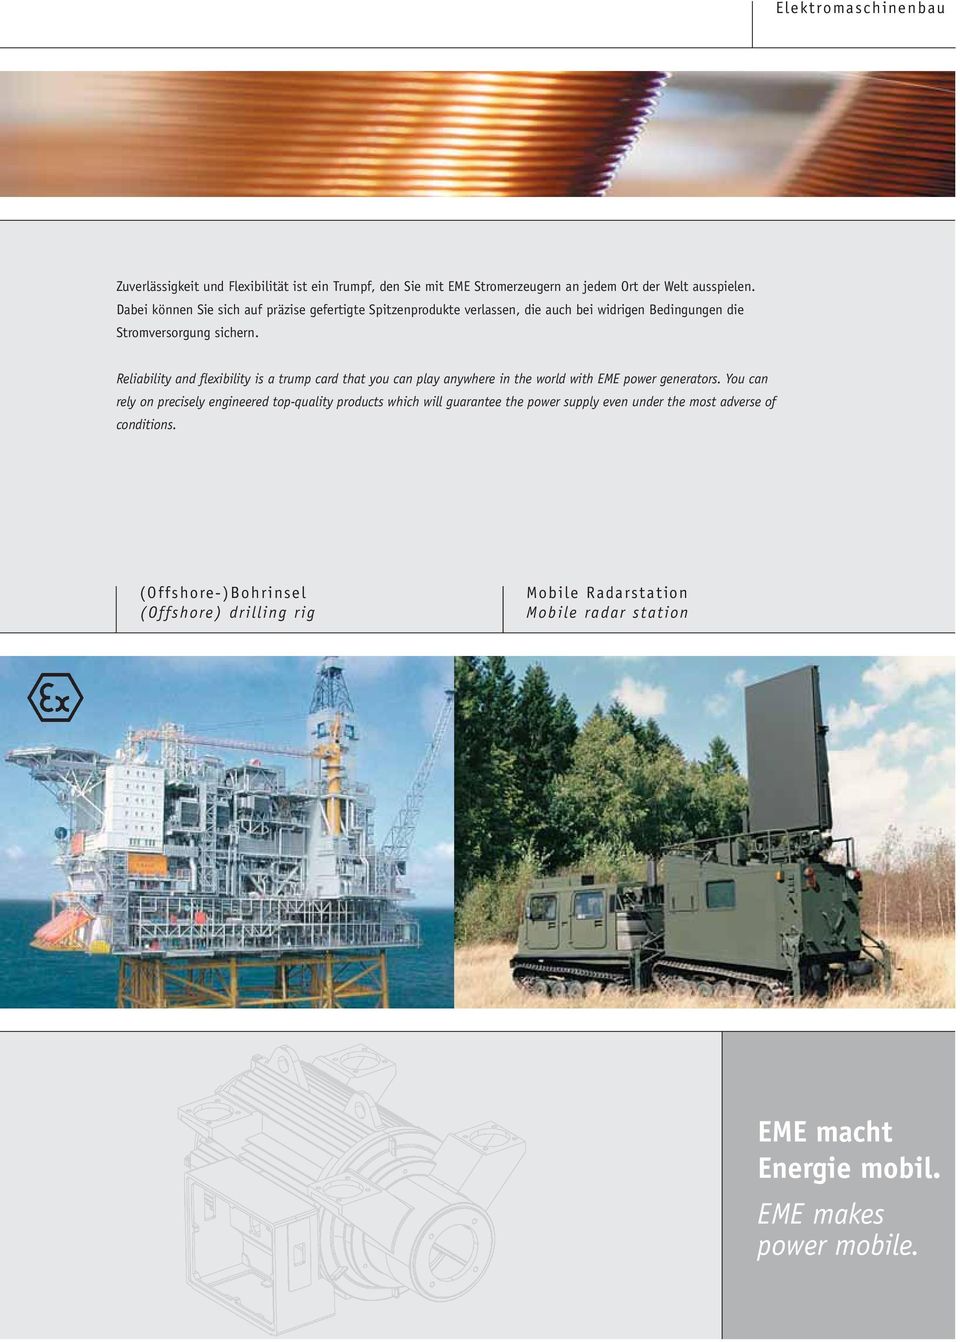 Reliability and flexibility is a trump card that you can play anywhere in the world with EME power generators.